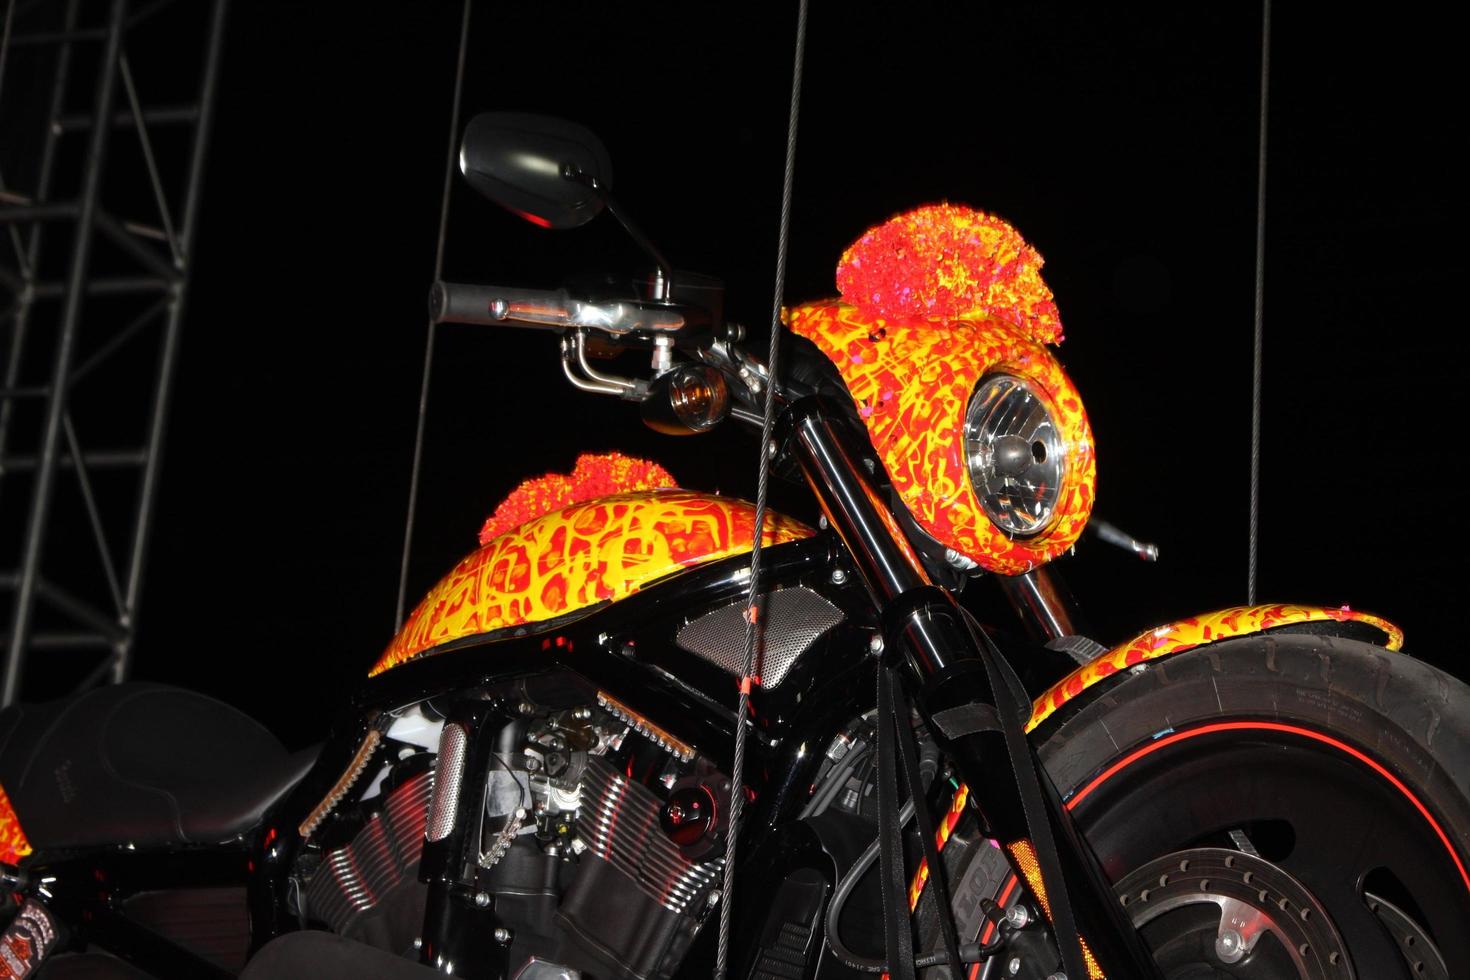 LOS ANGELES, OCT 21 Cosmic Starship Harley-Davidson 1 Million Motorcycle at the Harley Davidson Showcase - Unveiling of Cosmic Harley by Artist Jack Armstrong on October 21, 2010 in Marina Del Rey, CA photo